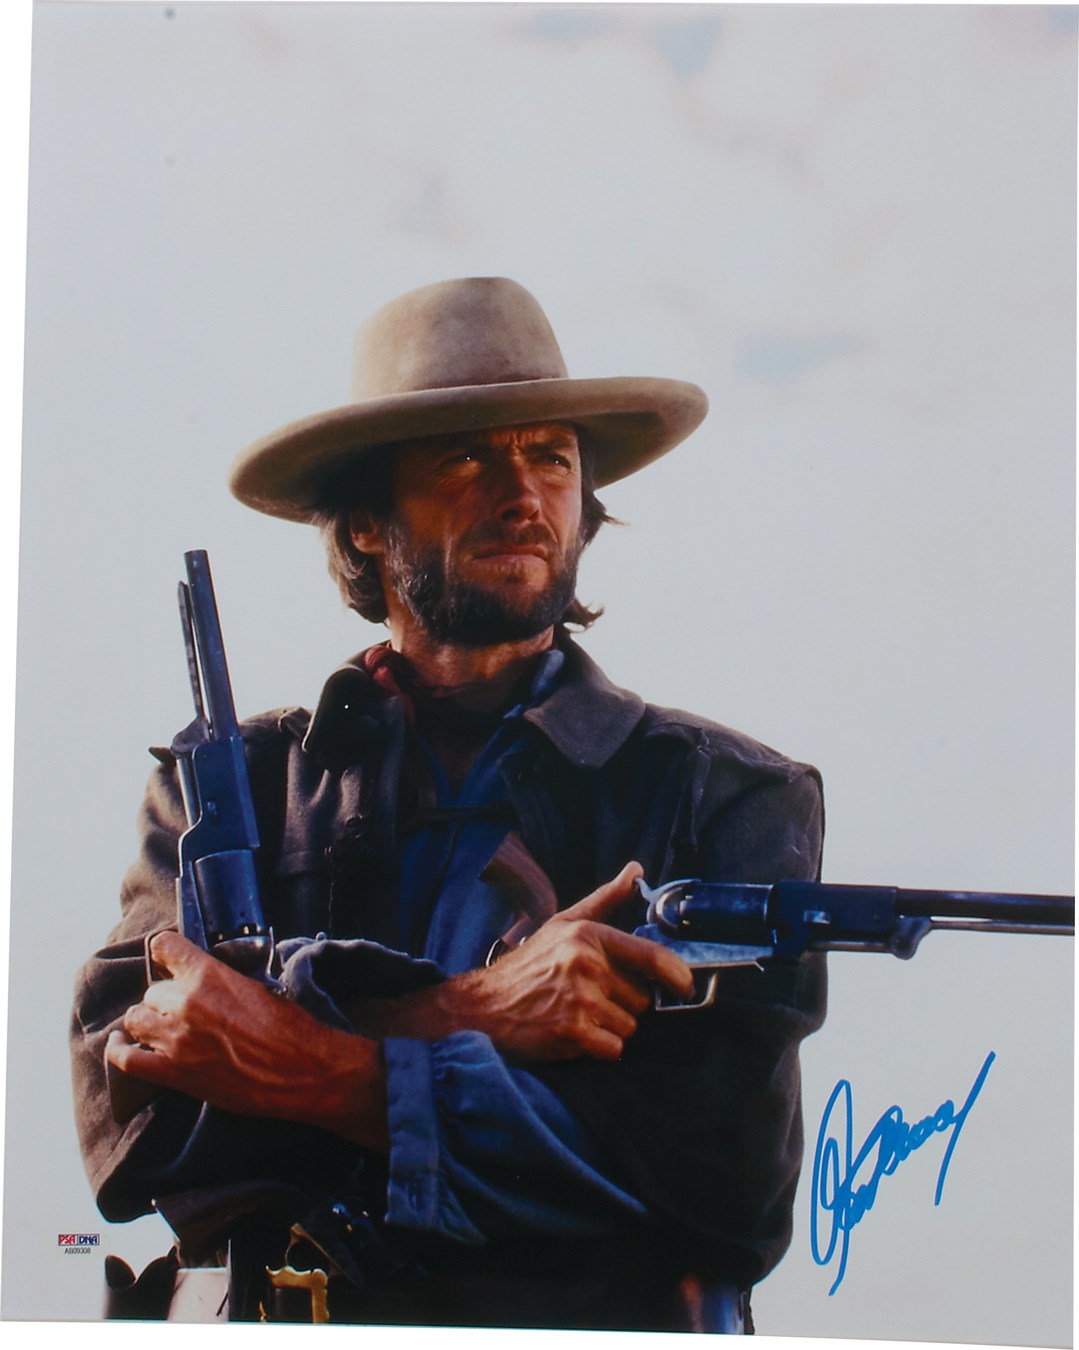 - Clint Eastwood 16x20" "Outlaw Josey Wales" Signed Photograph (PSA/DNA)